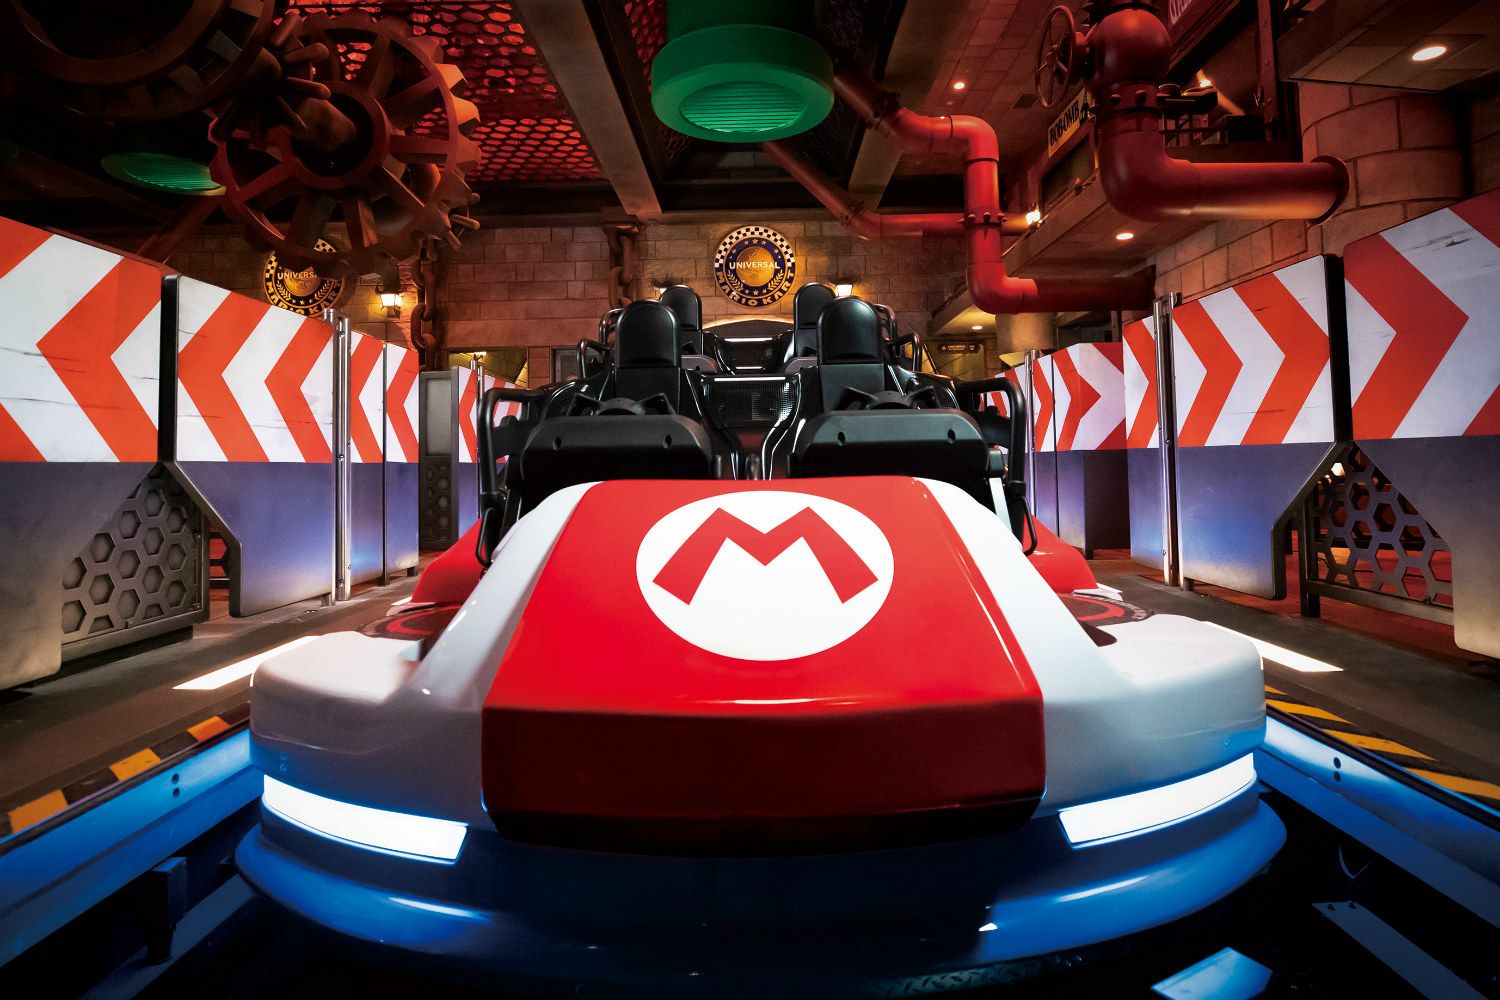 Super Nintendo World Images First Official Look At Mario Kart Rollercoaster